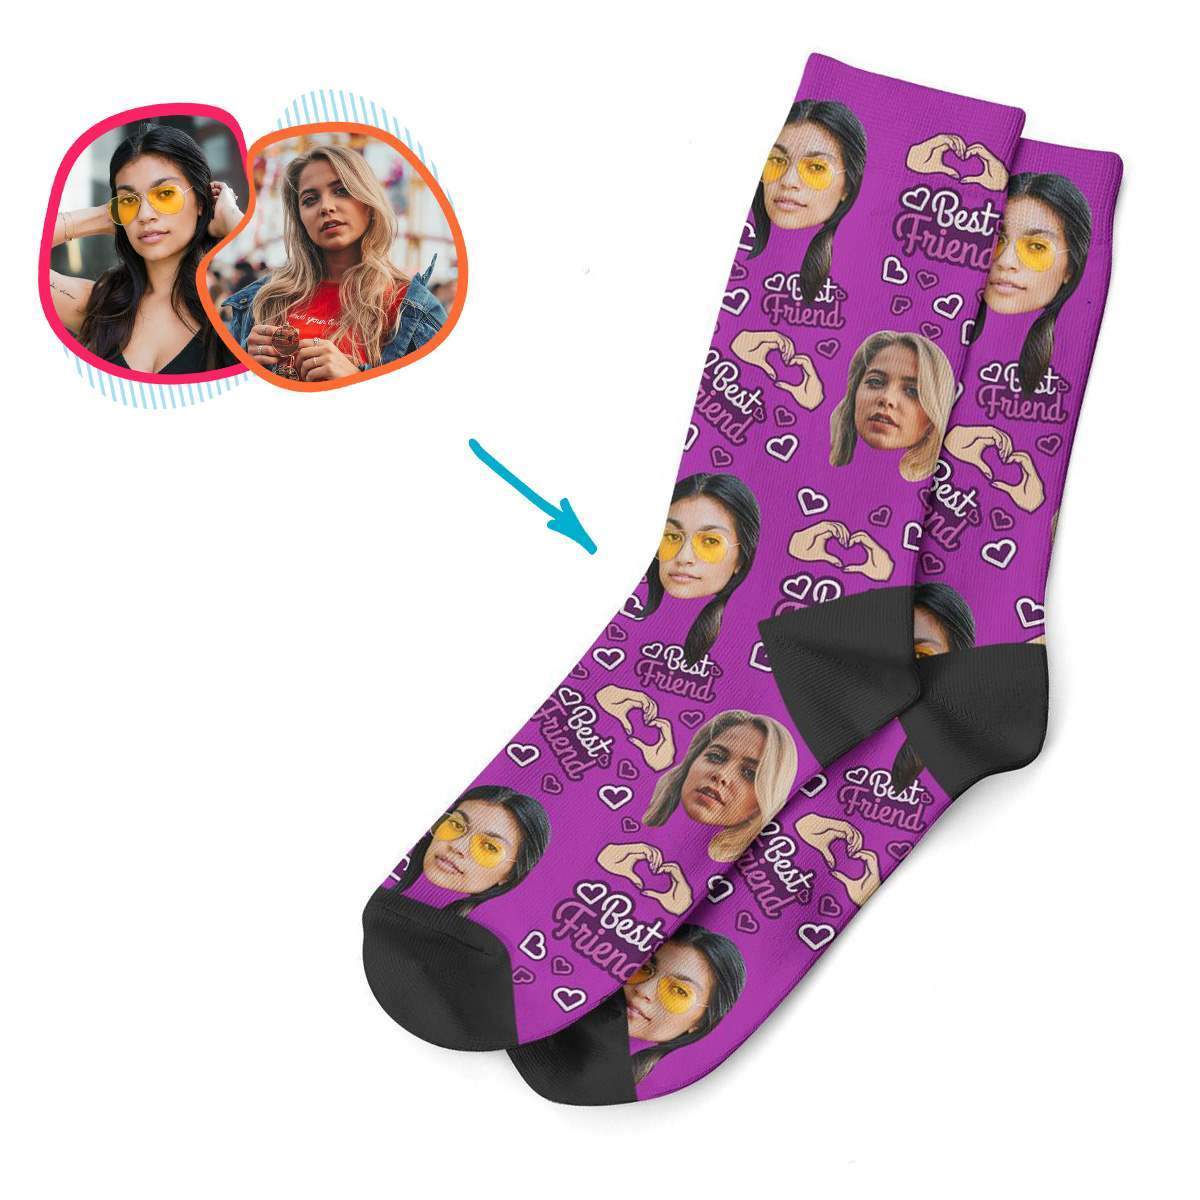 BFF for Her Personalized Socks